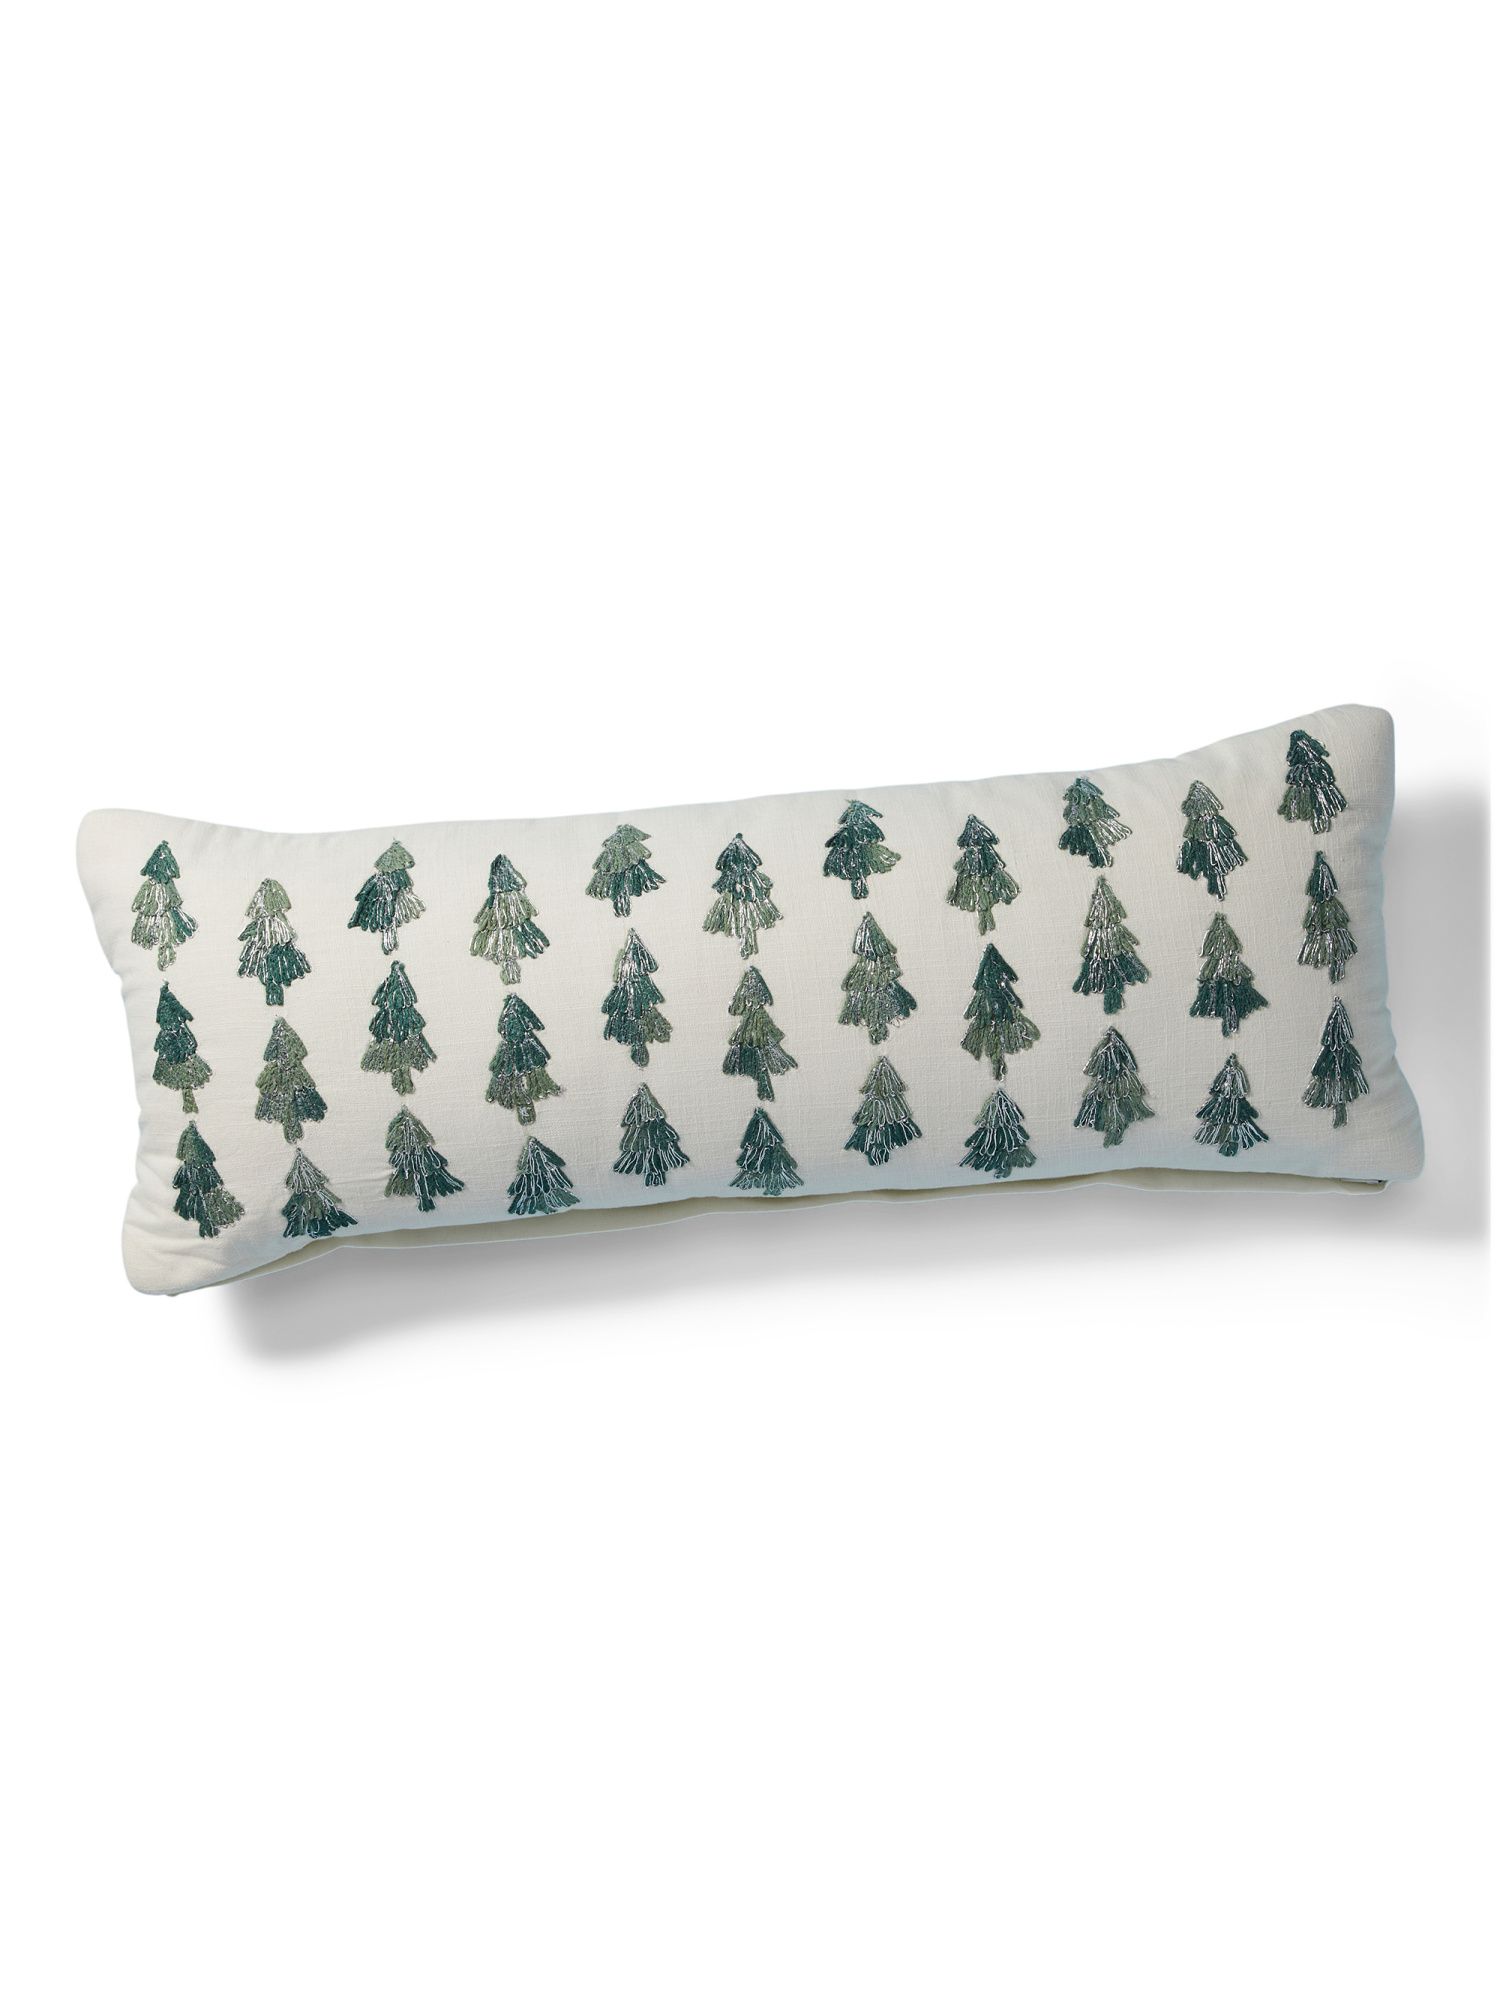 10x28 Magic Forest Embroidered Pillow | TJ Maxx